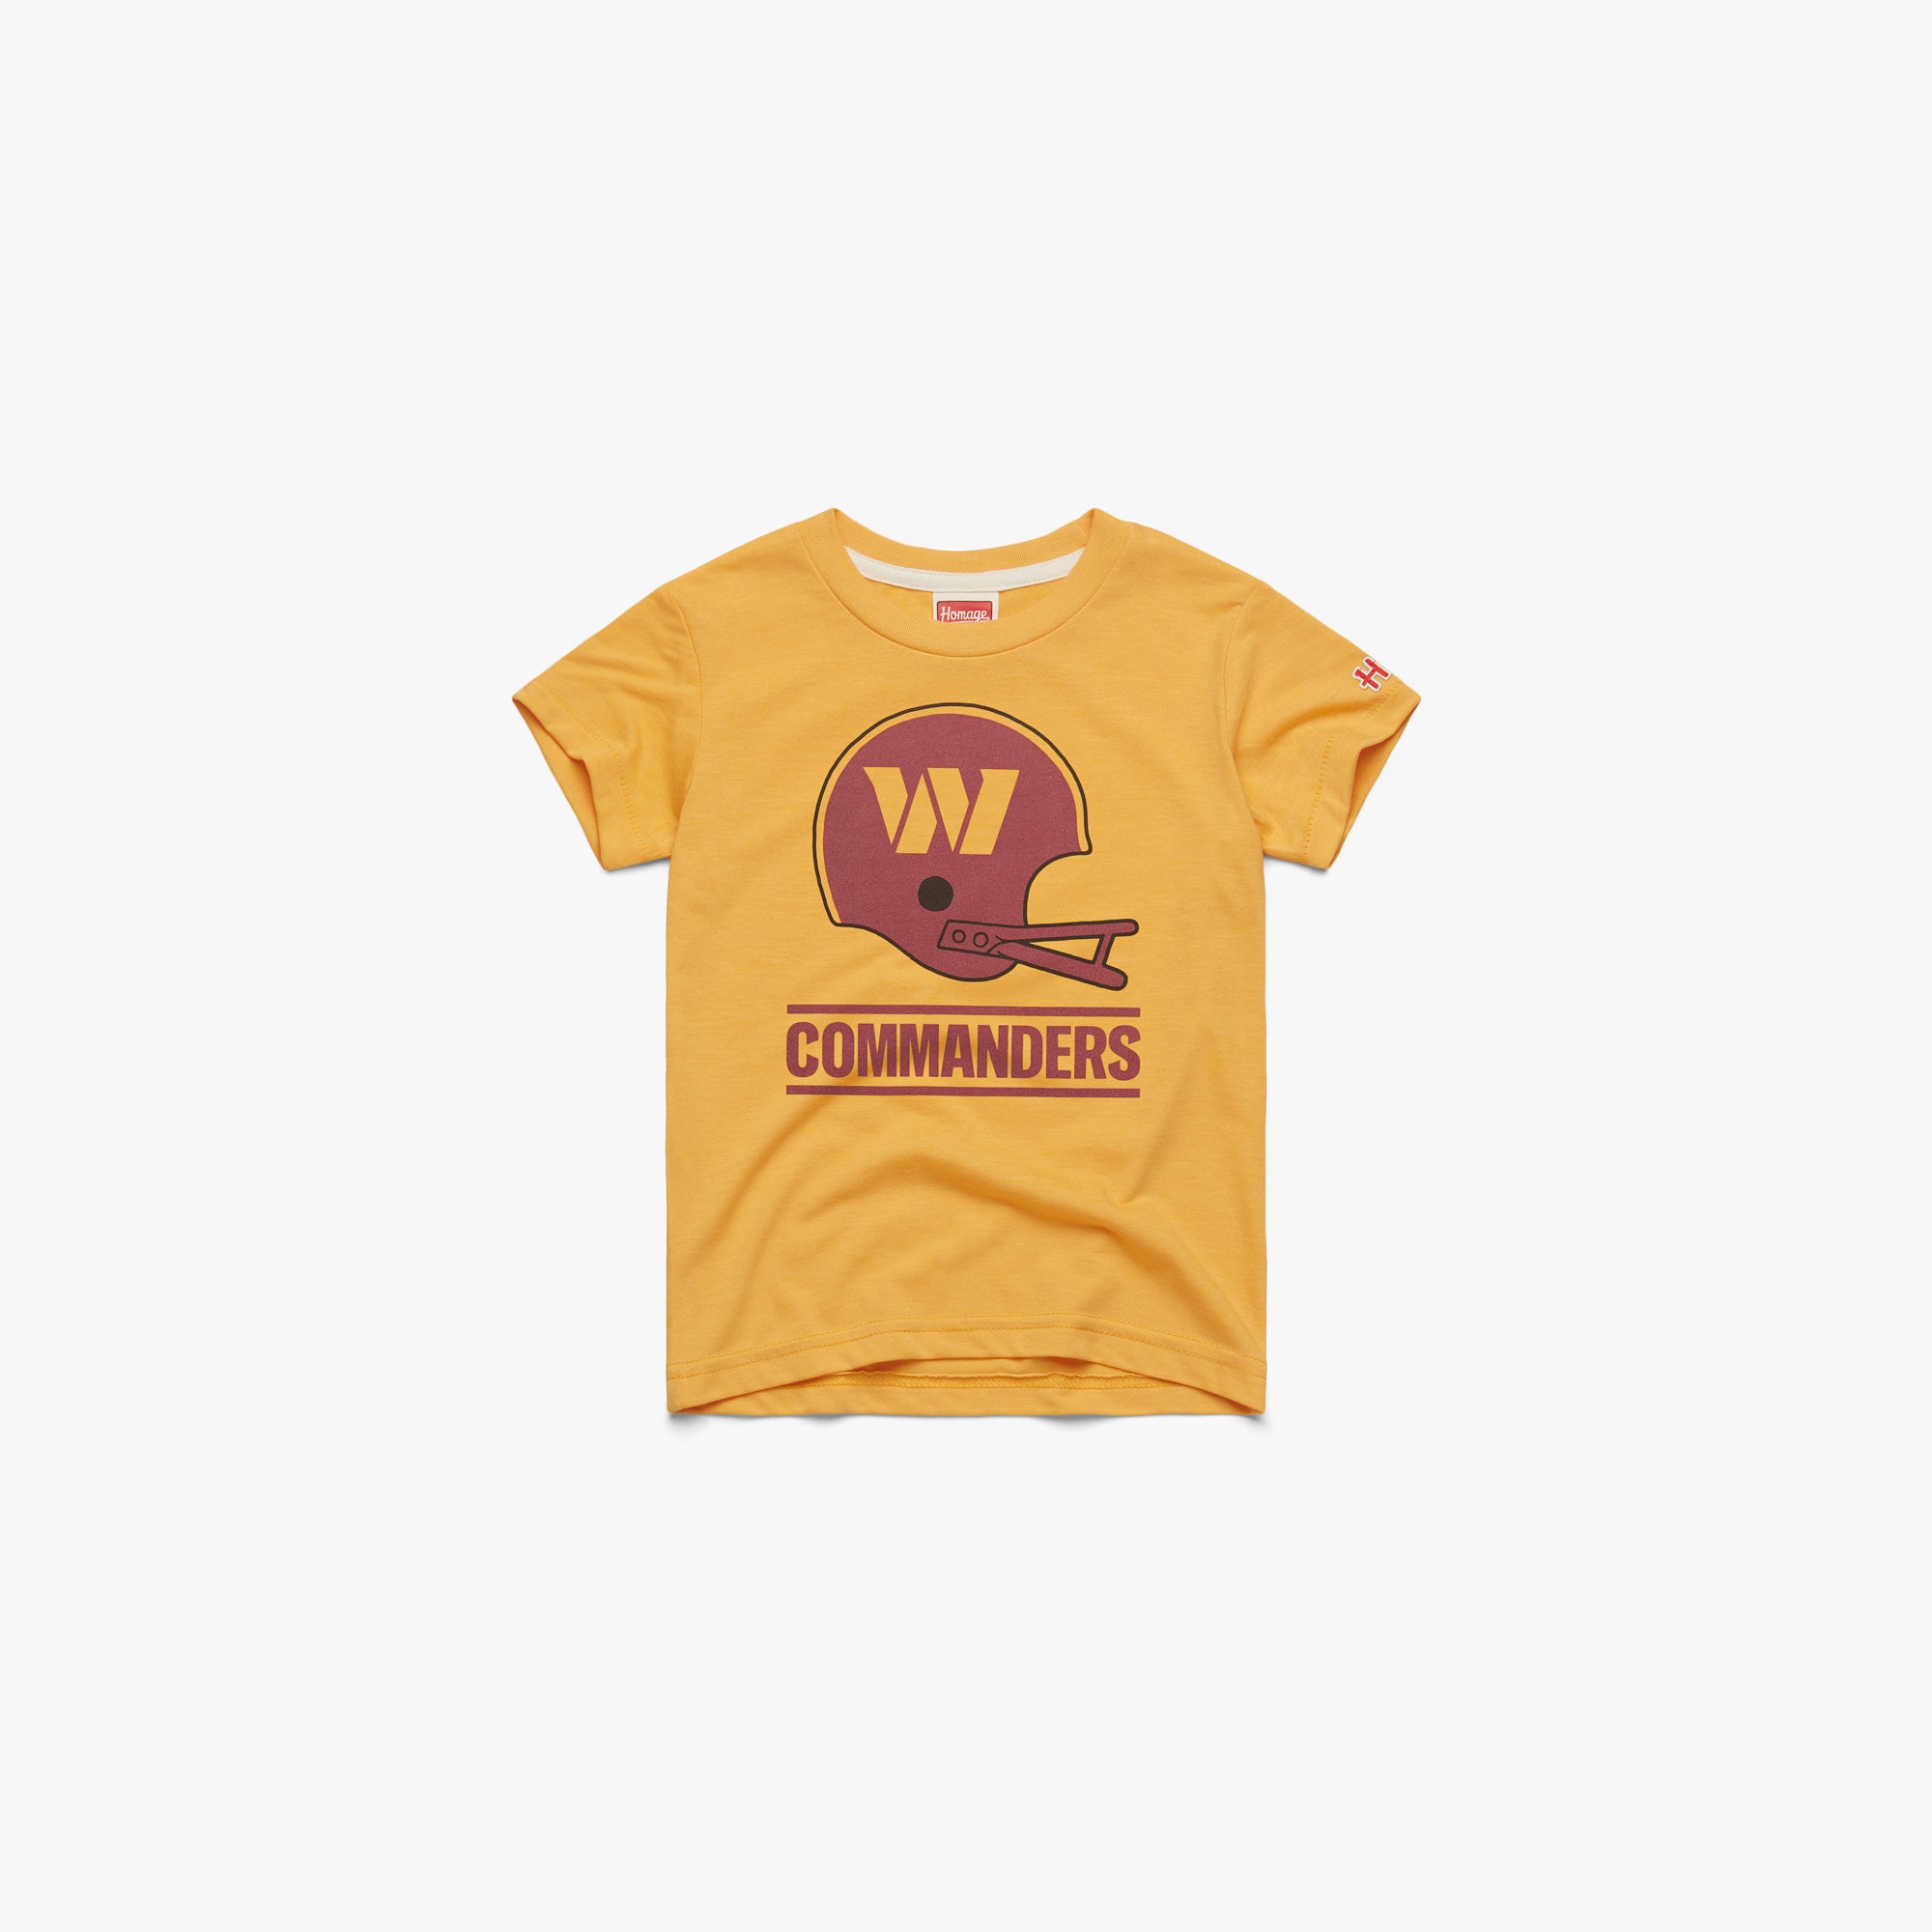 Youth Washington Commanders Big Helmet Youth T-Shirt from Homage. | Officially Licensed Vintage NFL Apparel from Homage Pro Shop.